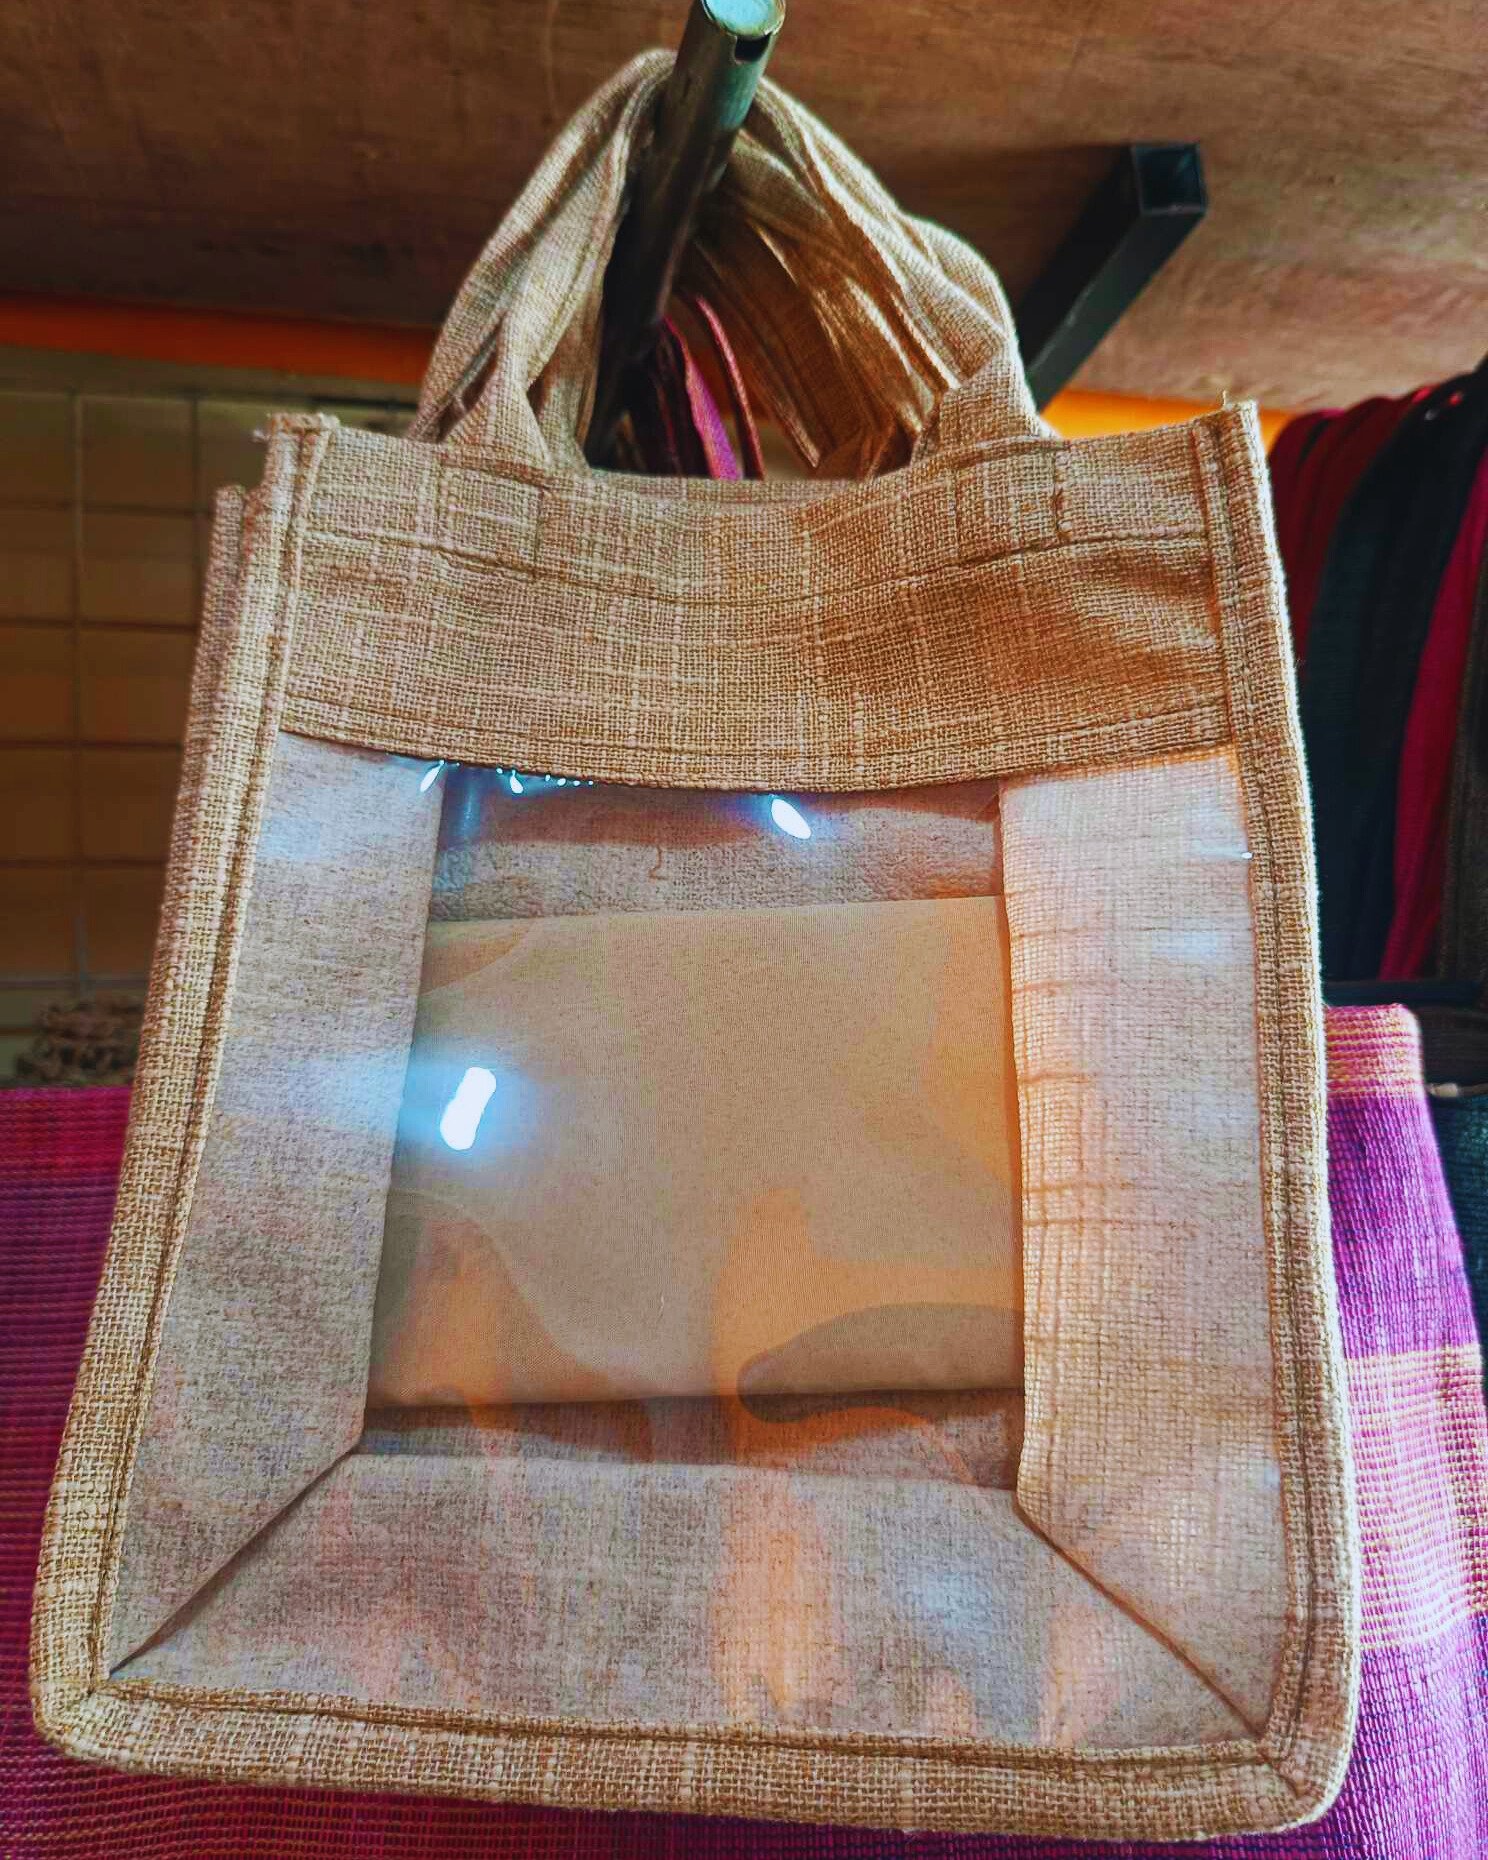 http://www.e-scs.shop/storage/photos/20/Products/Abaca Lunch Bag.jpg